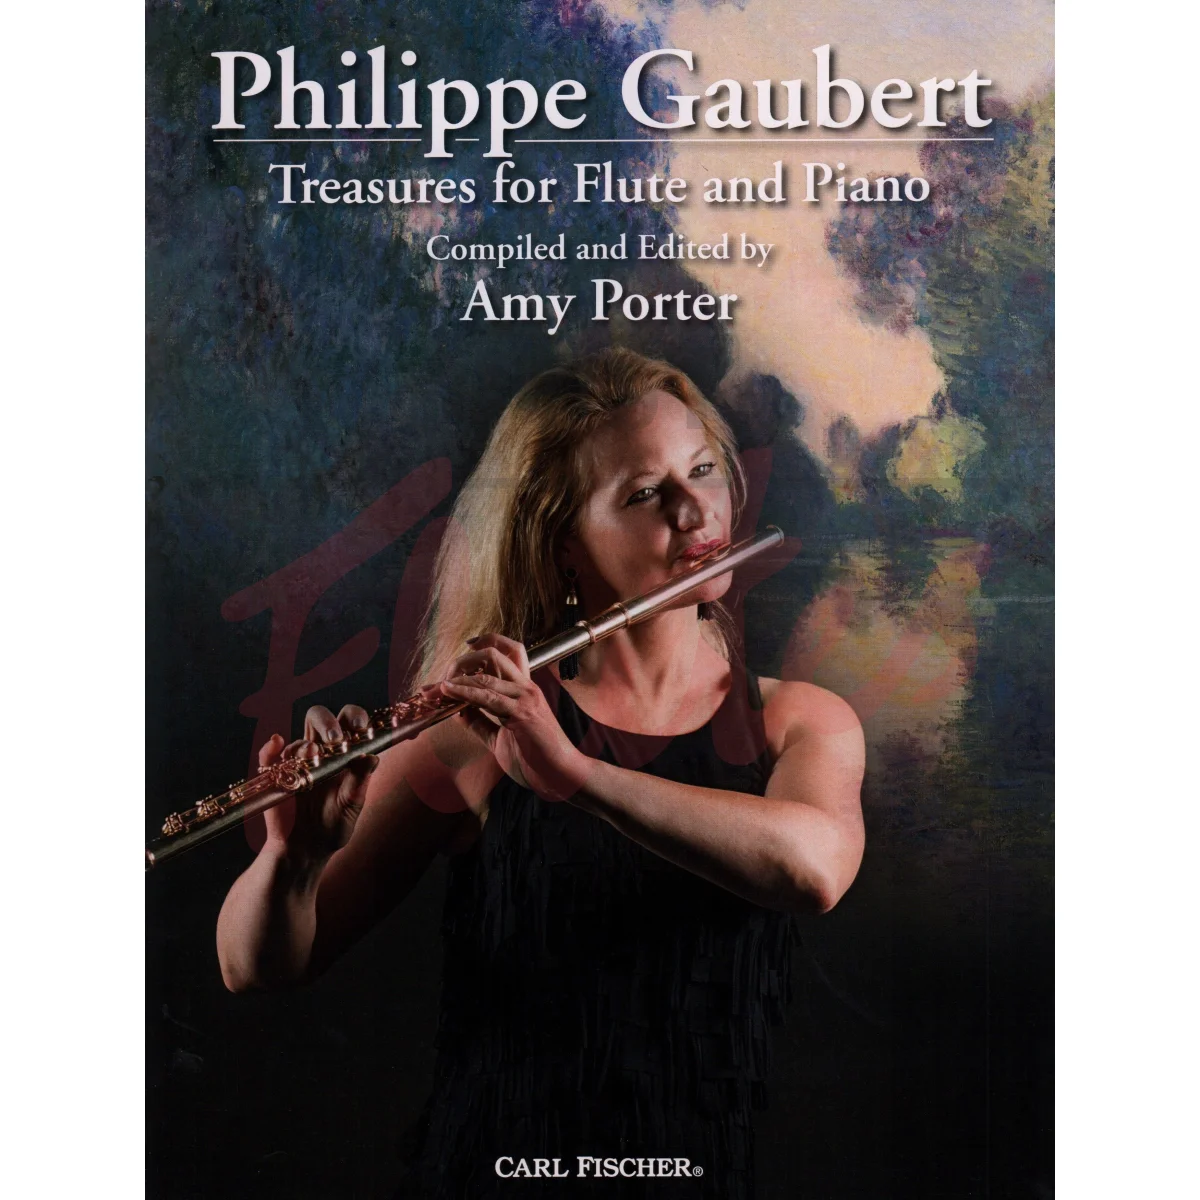 Treasures for Flute and Piano